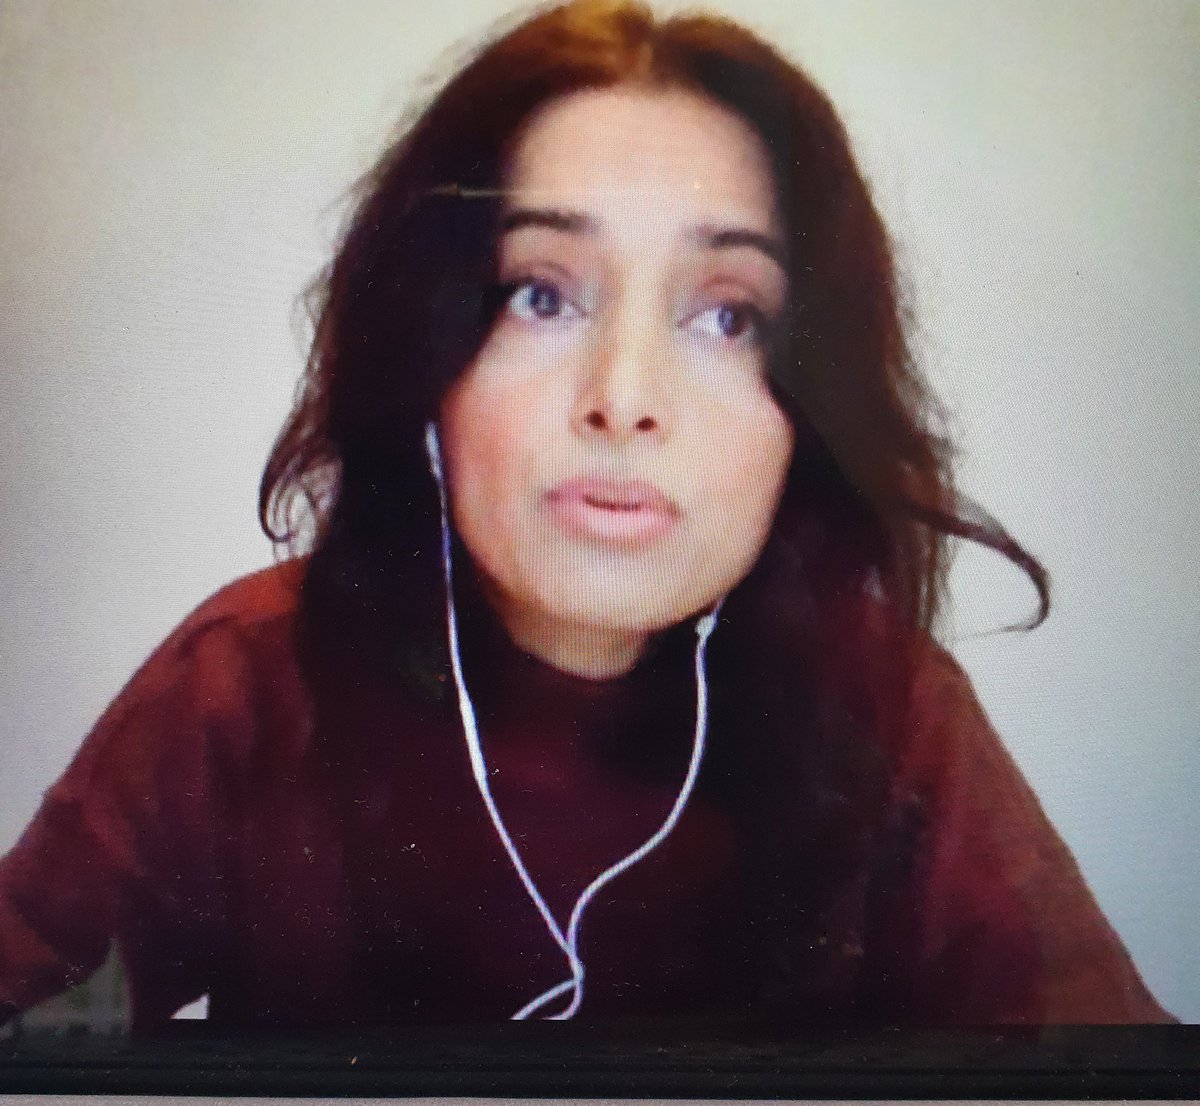 I have been lifted by listening to the honesty of @Deeyah_Khan sharing experiences & journey, Thank you. Well done @compinpolitics @jenniferdnadel for organising this. Representation matters. #CompassionInPolitics #DeeyahKhan #LiftingTheLid #BreakingTaboo #RaisingAwareness